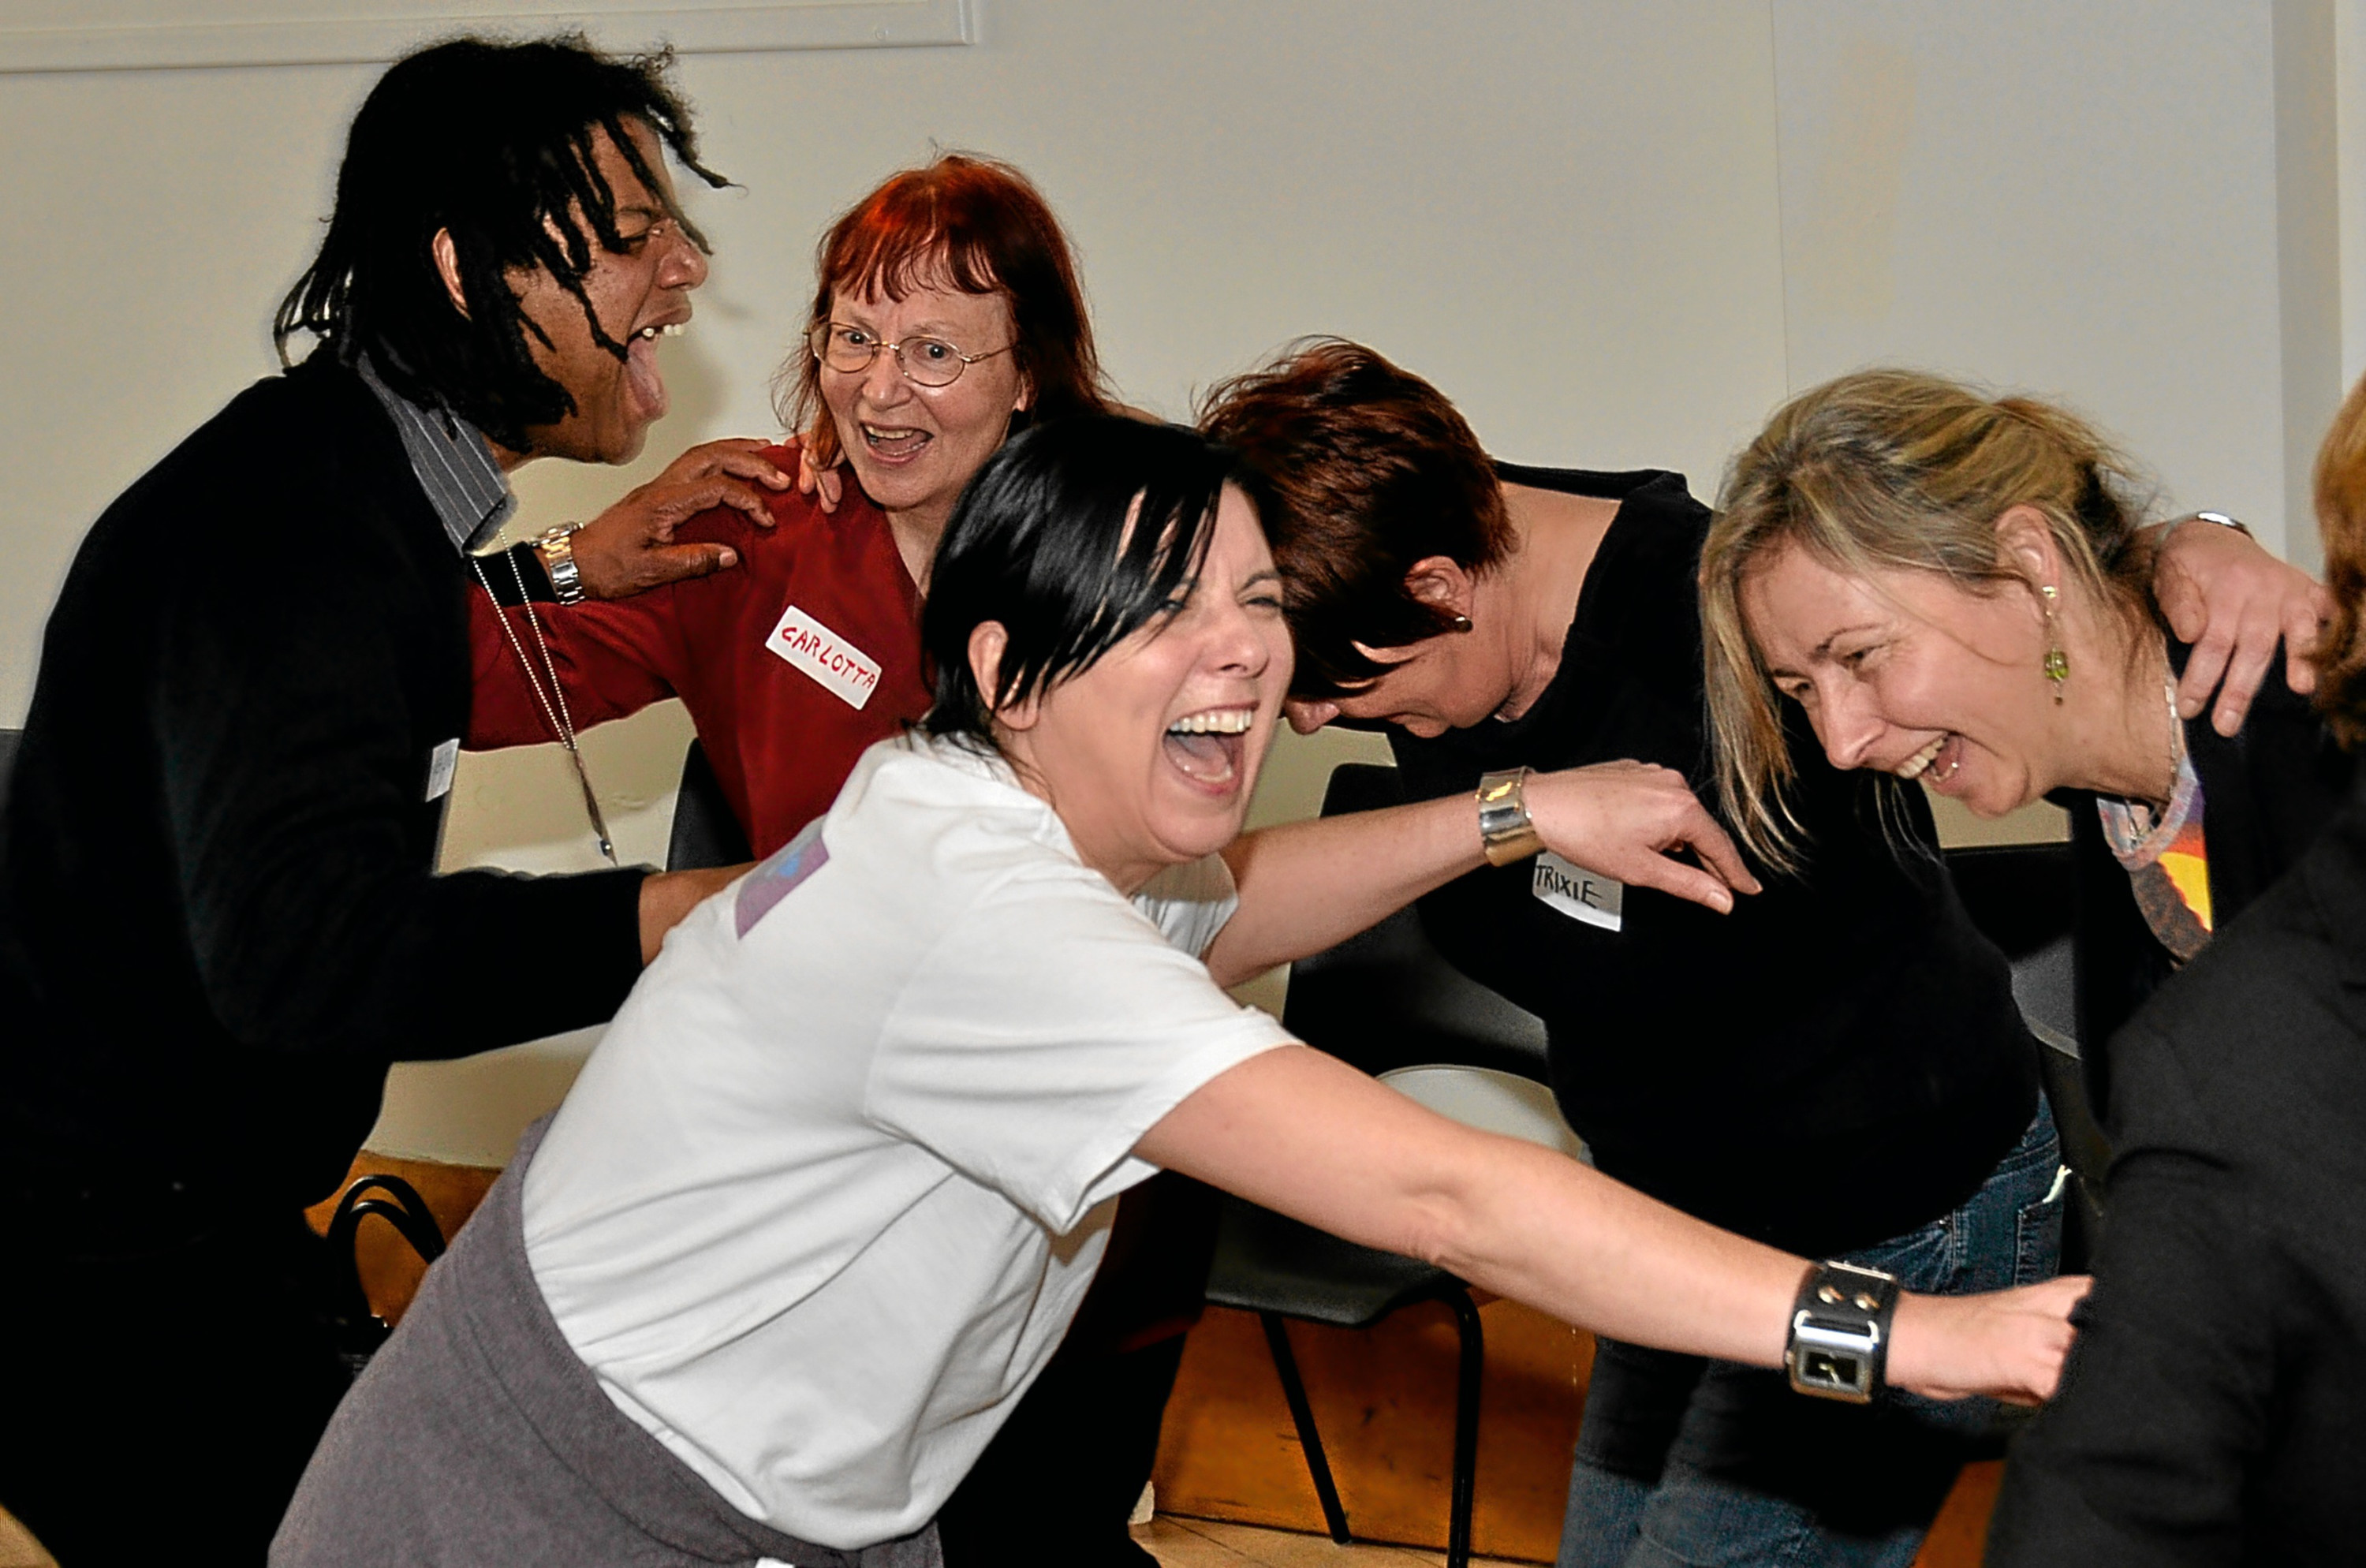 Joyworks Laughter Yoga sessions like this will act as a precursor to Dundee's ParkLives festival